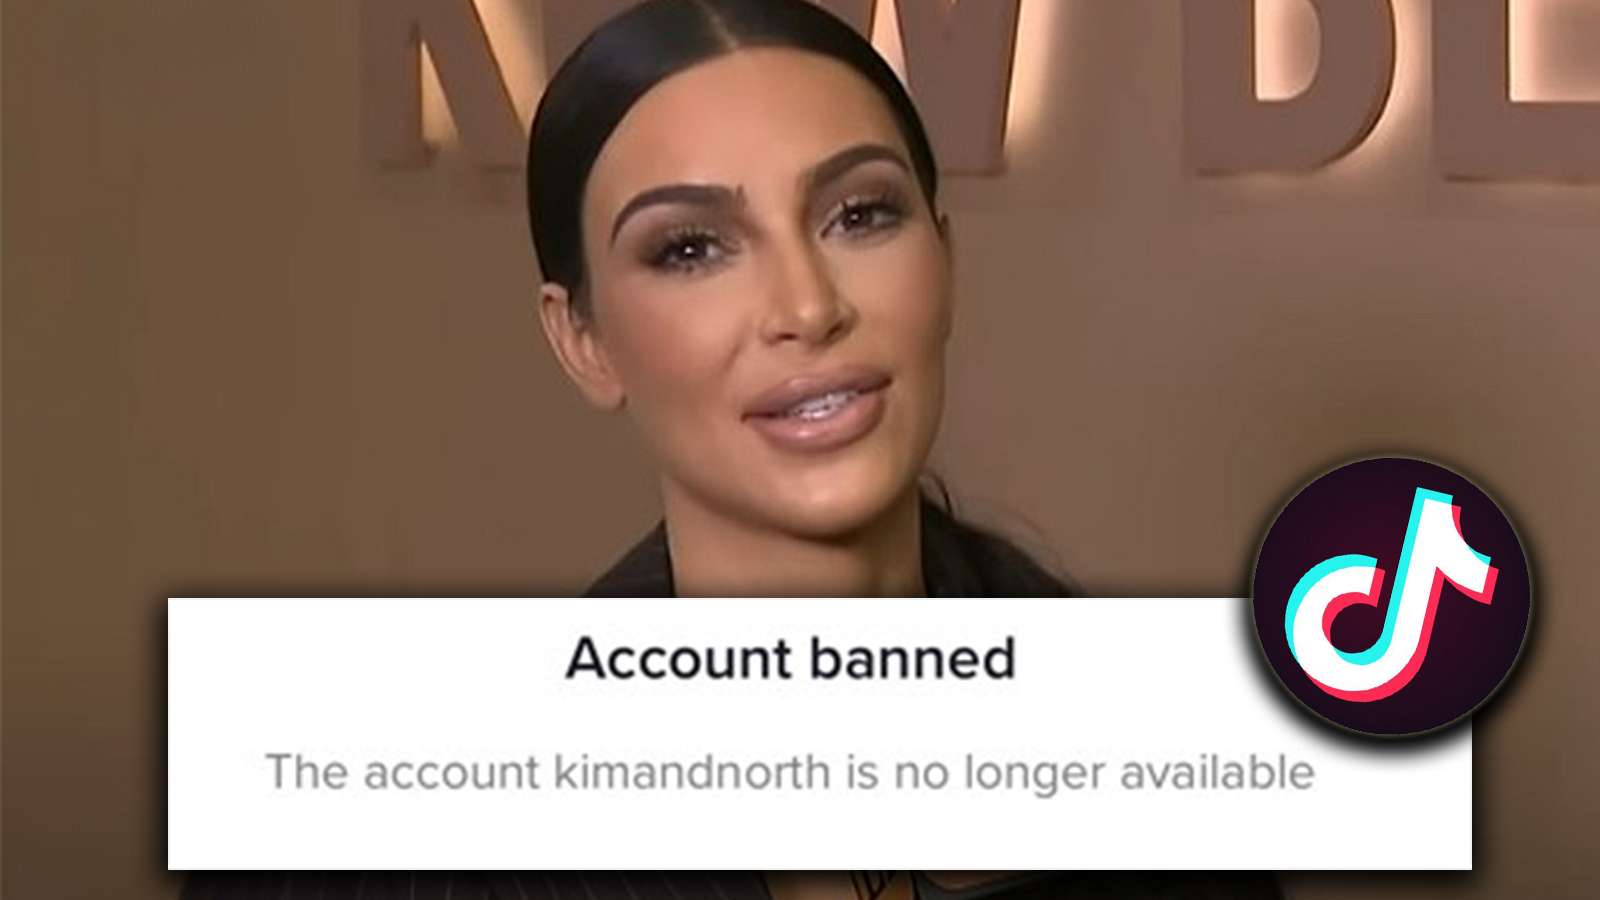 Kim and north tiktok account mysteriously banned